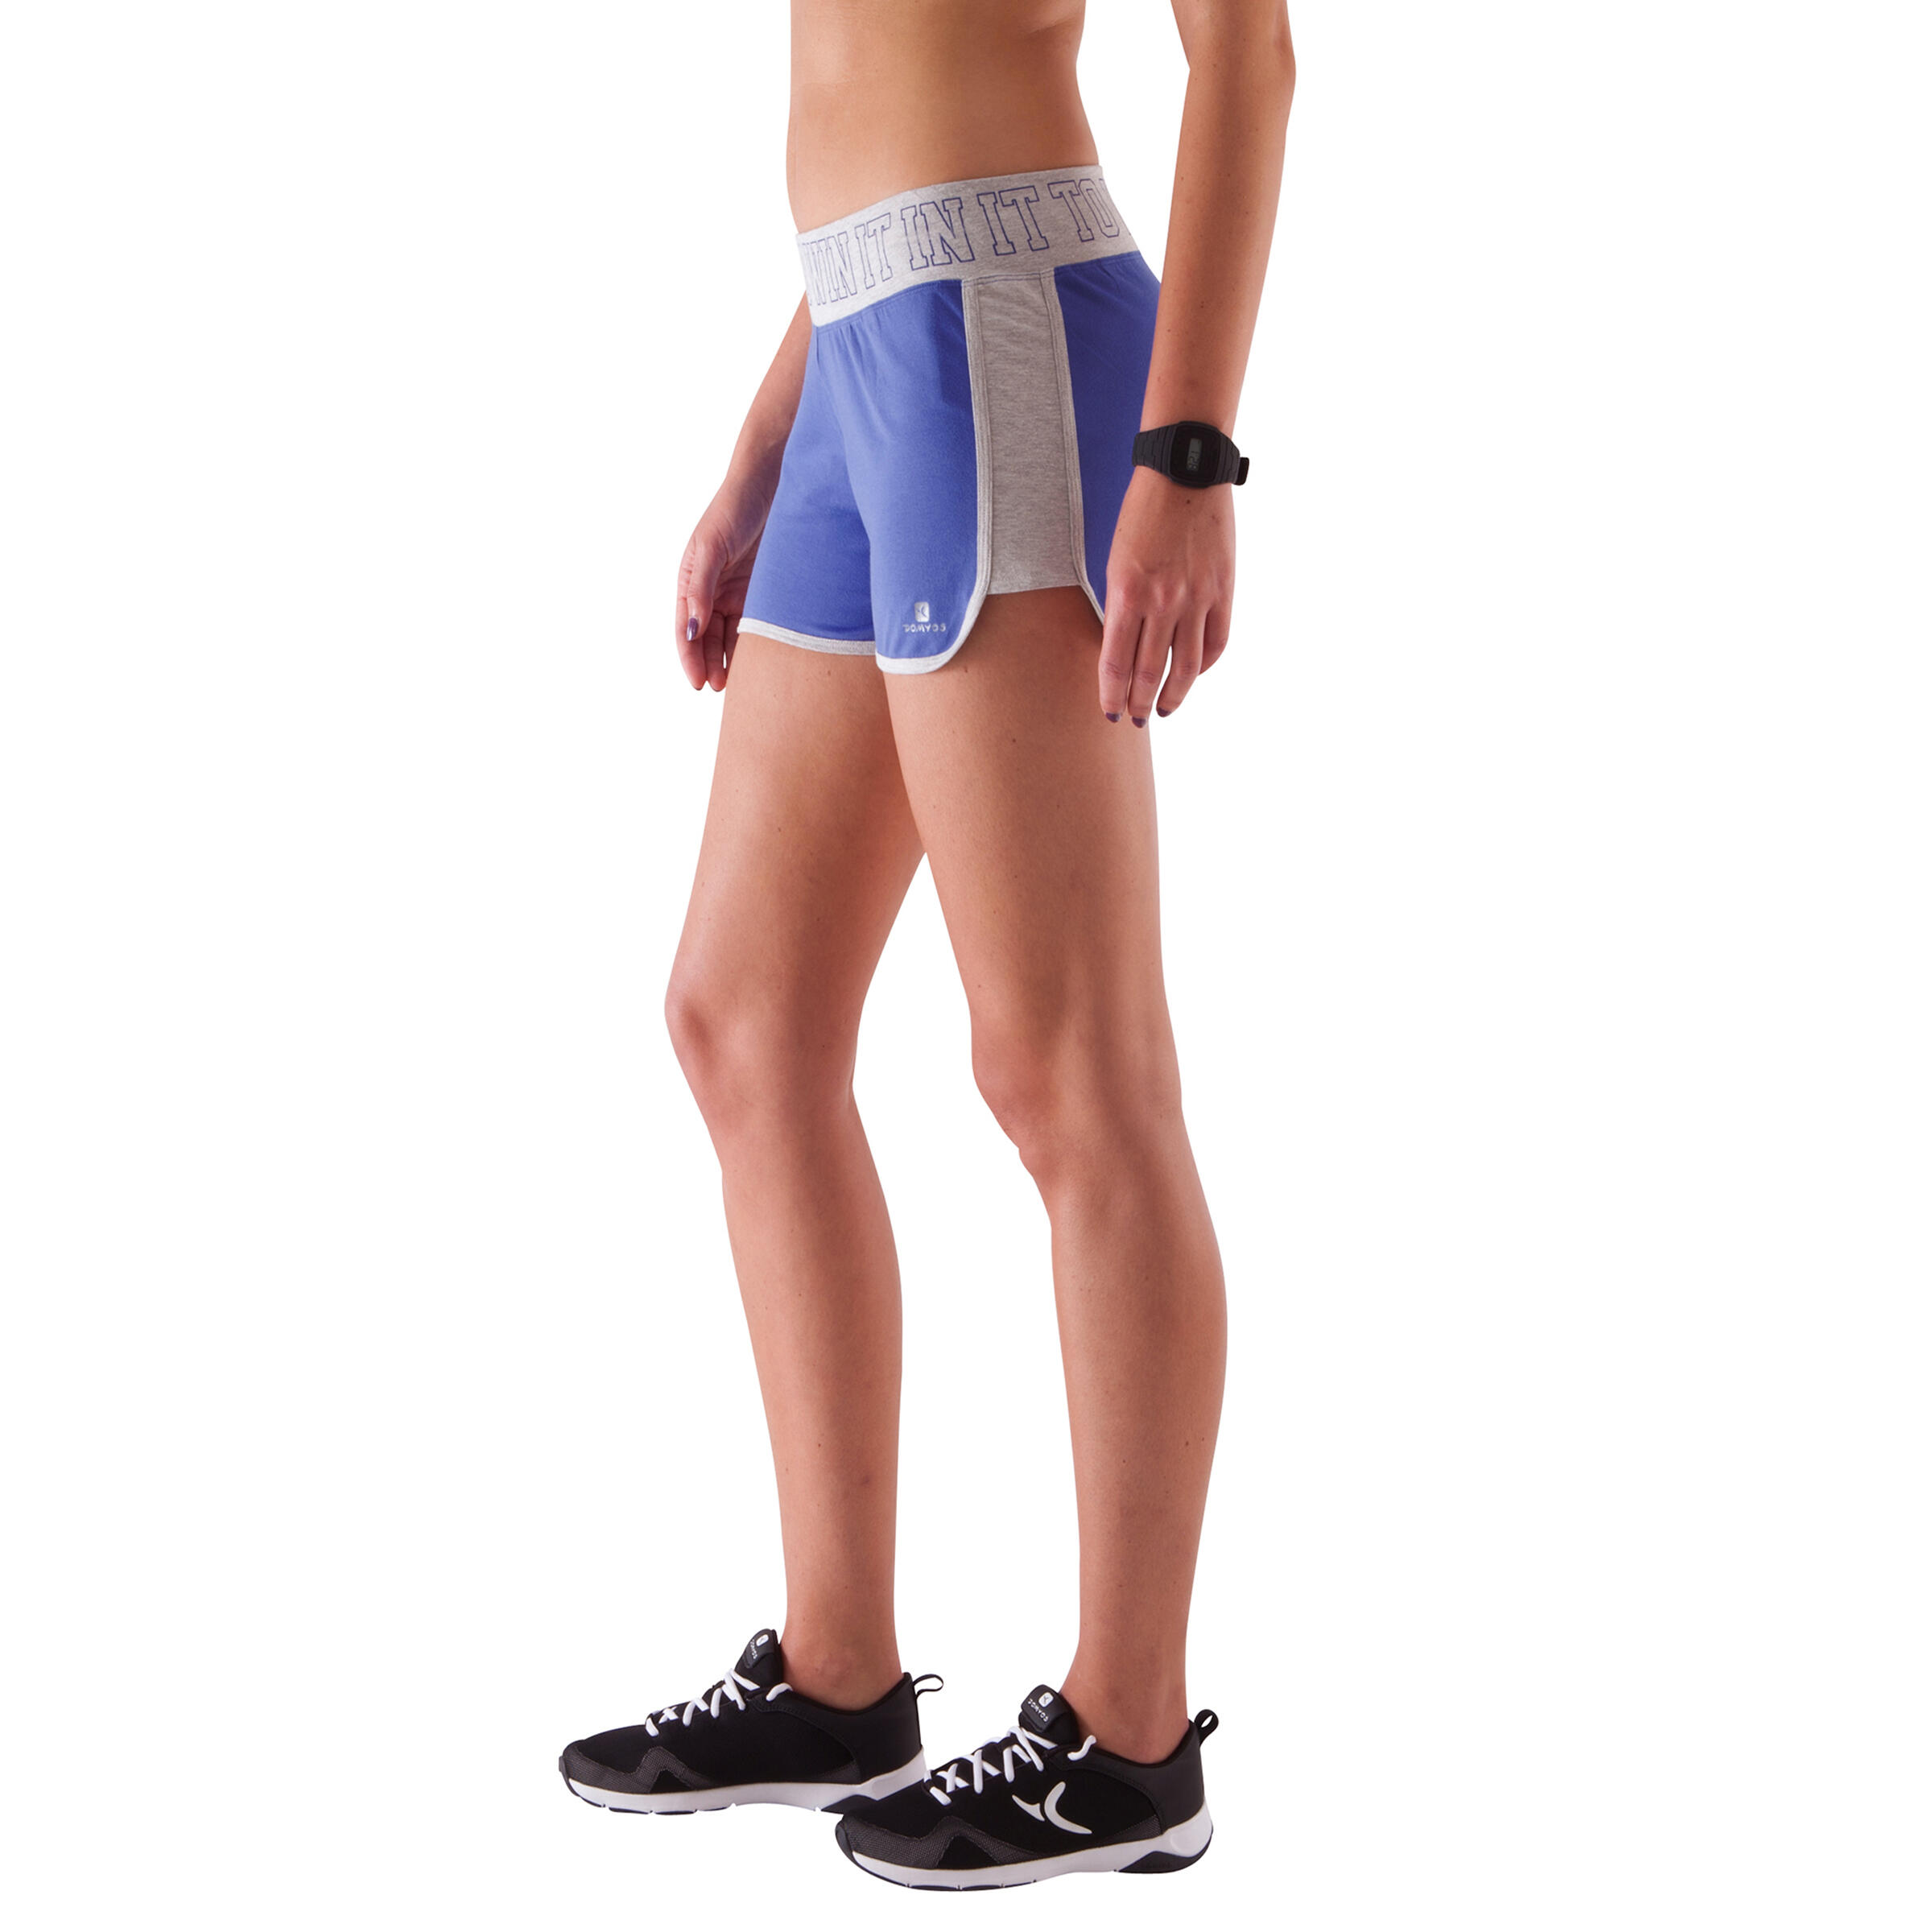 Women's Fitness Shorts with Contrasting Waistband - Blue/Grey 5/10